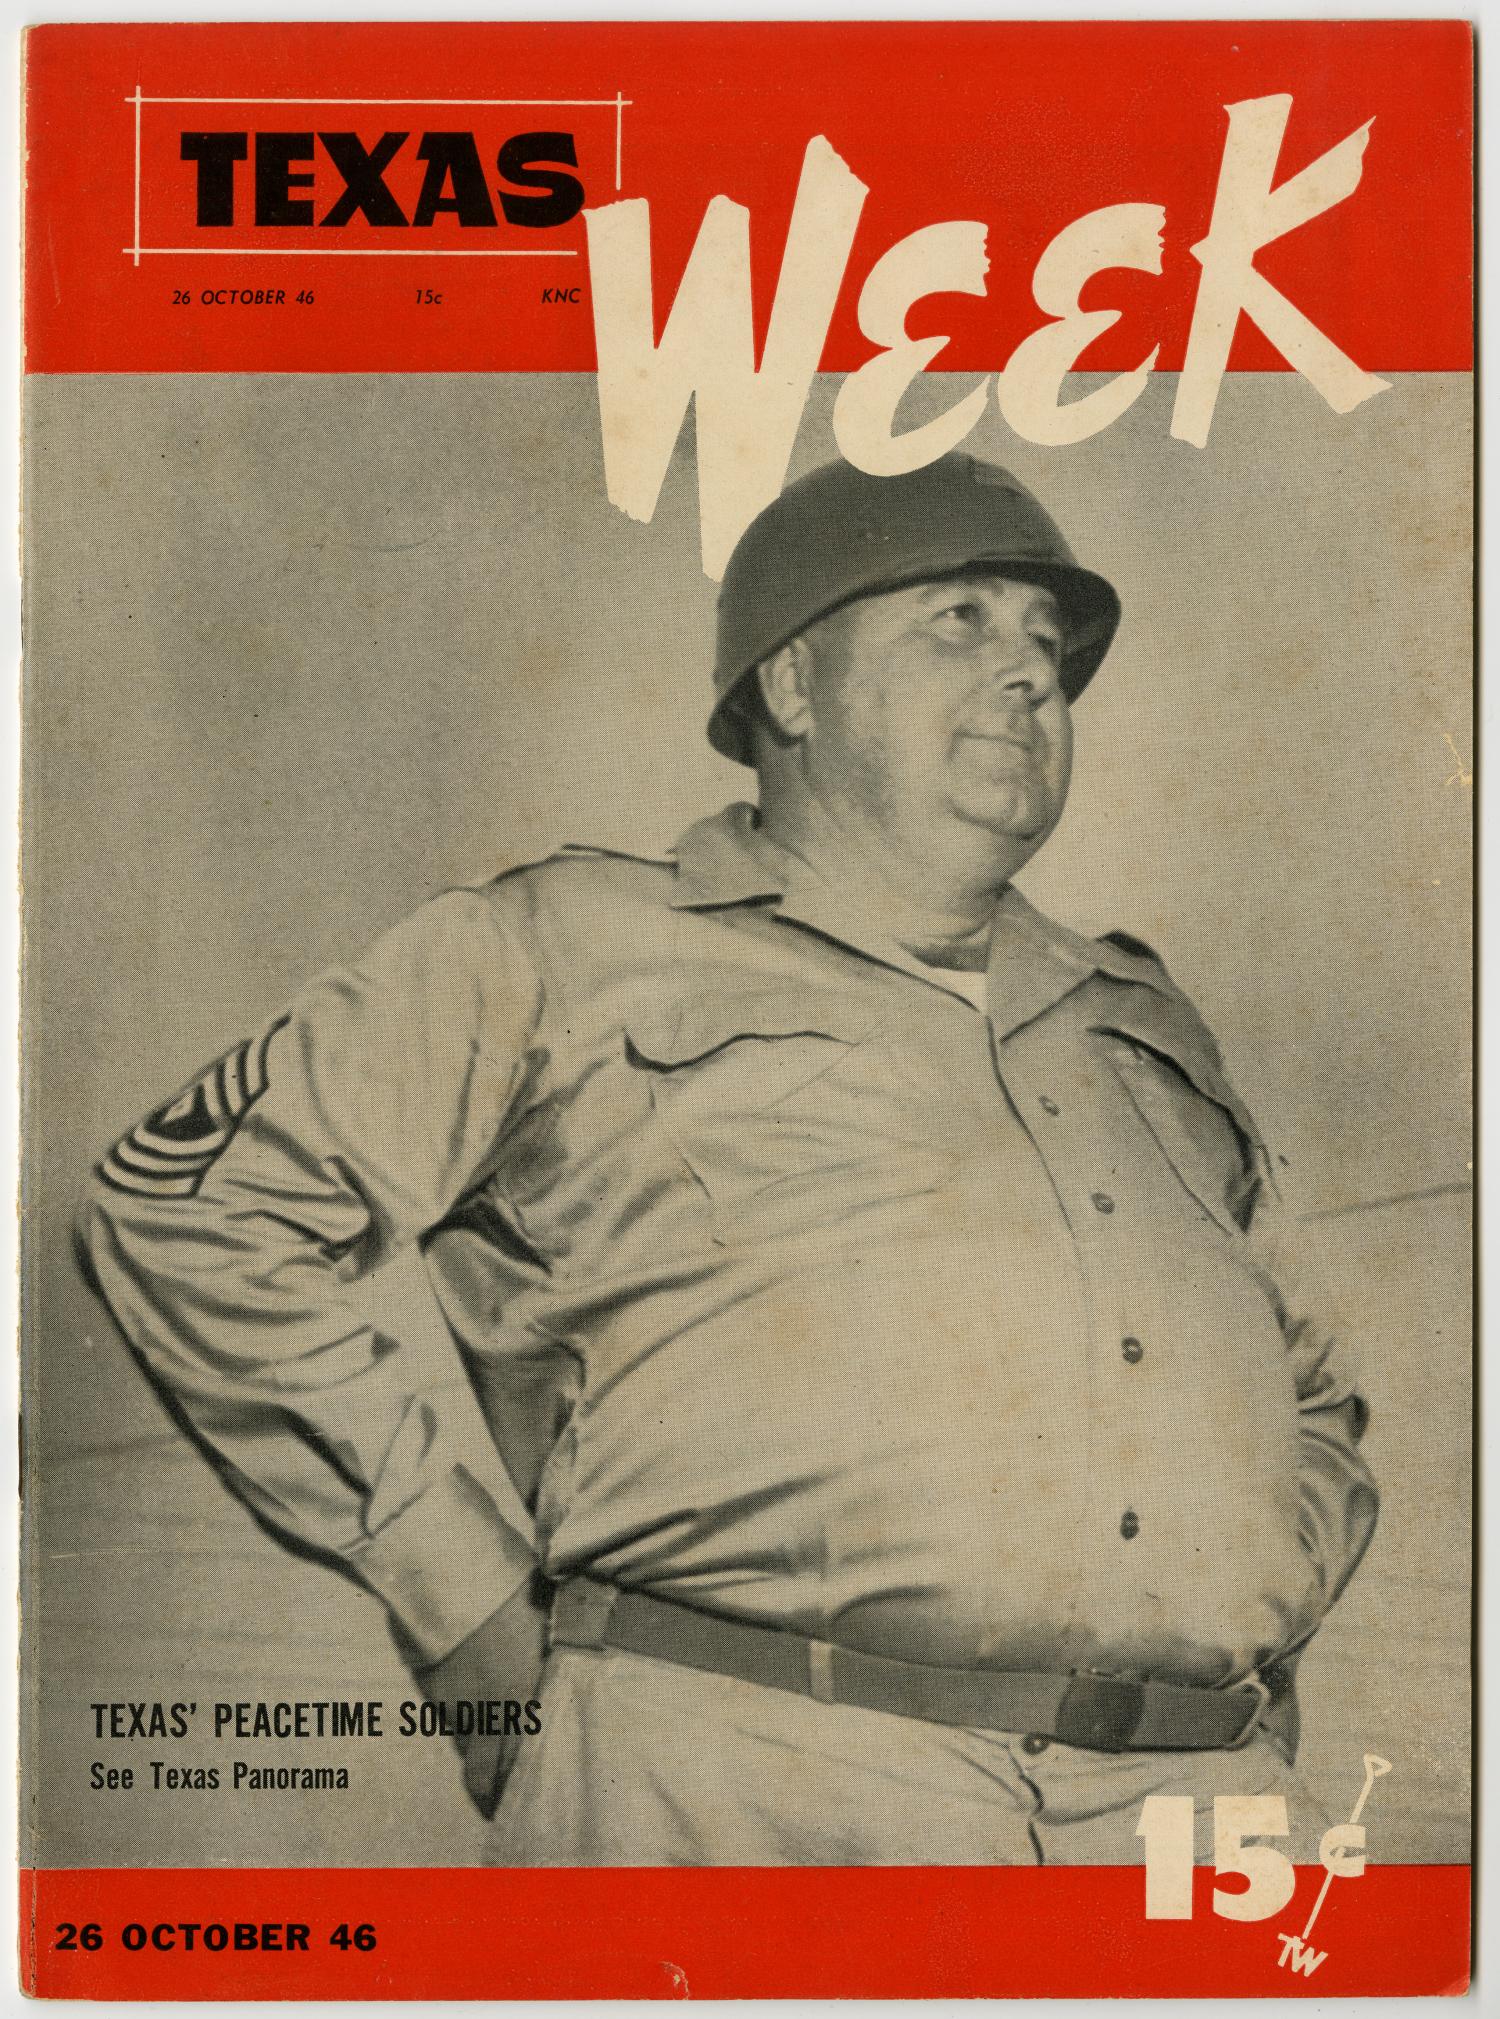 Texas Week, Volume 1, Number 11, October 26, 1946
                                                
                                                    Front Cover
                                                